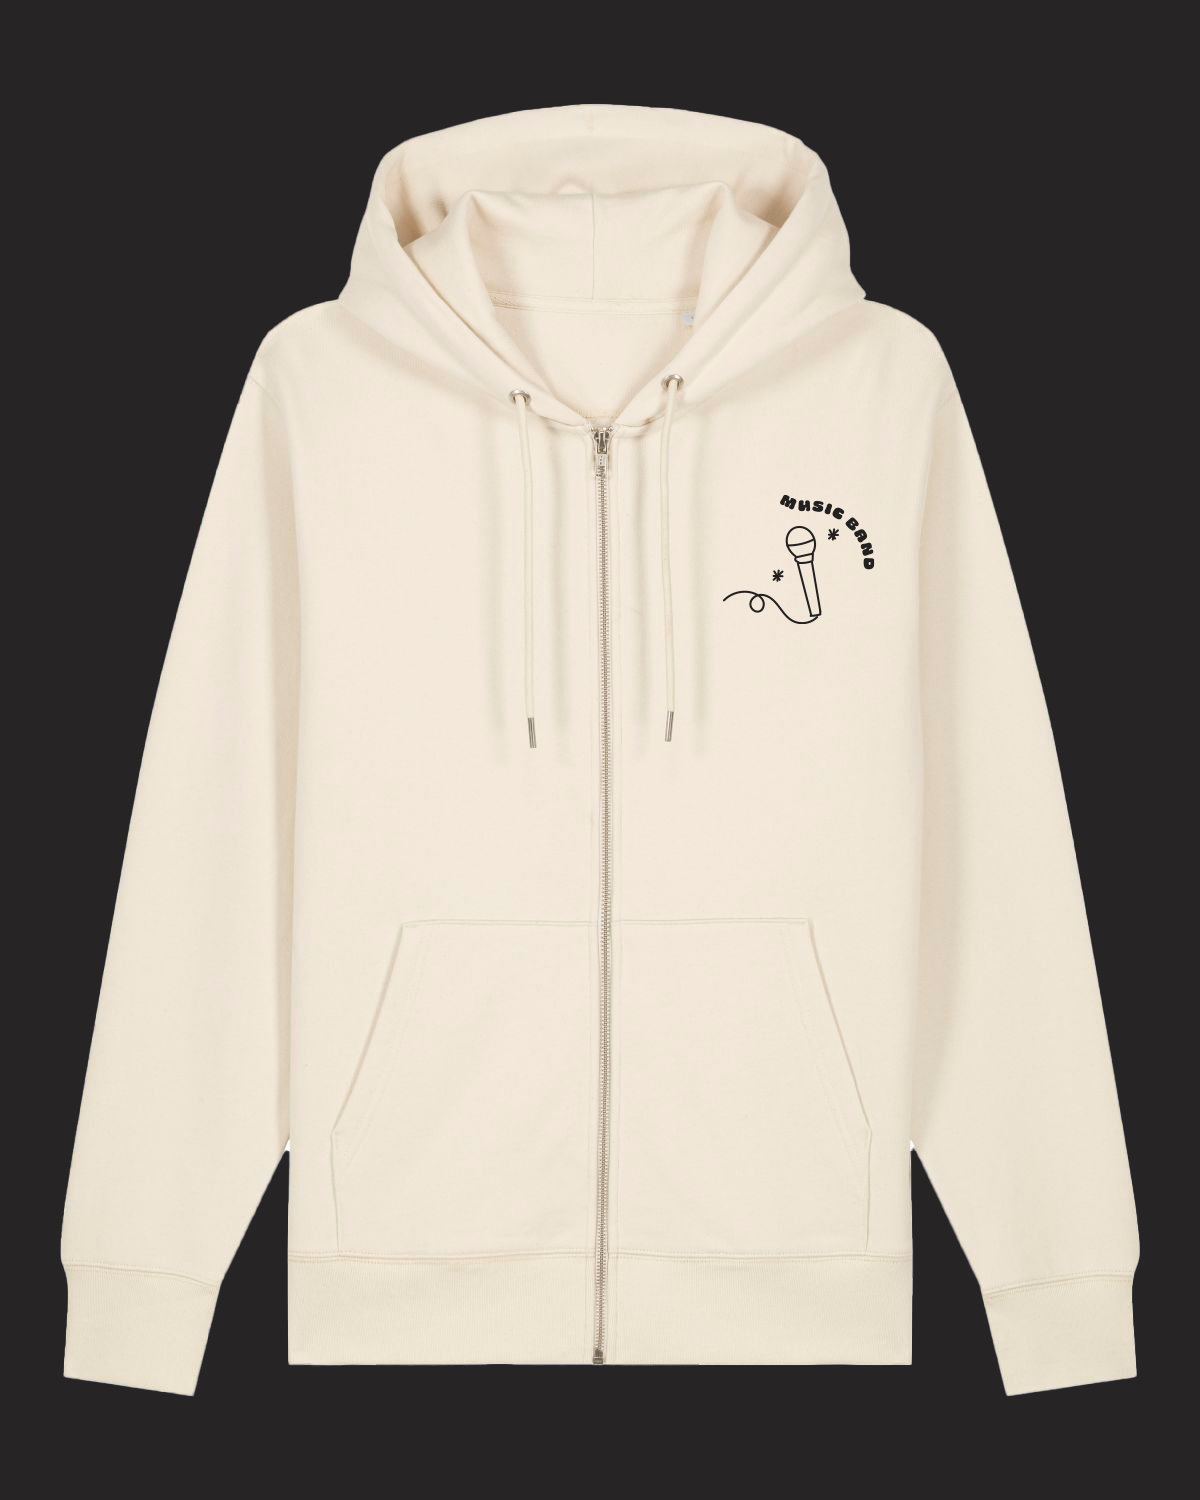 Customize your own eco friendly zip hoodie